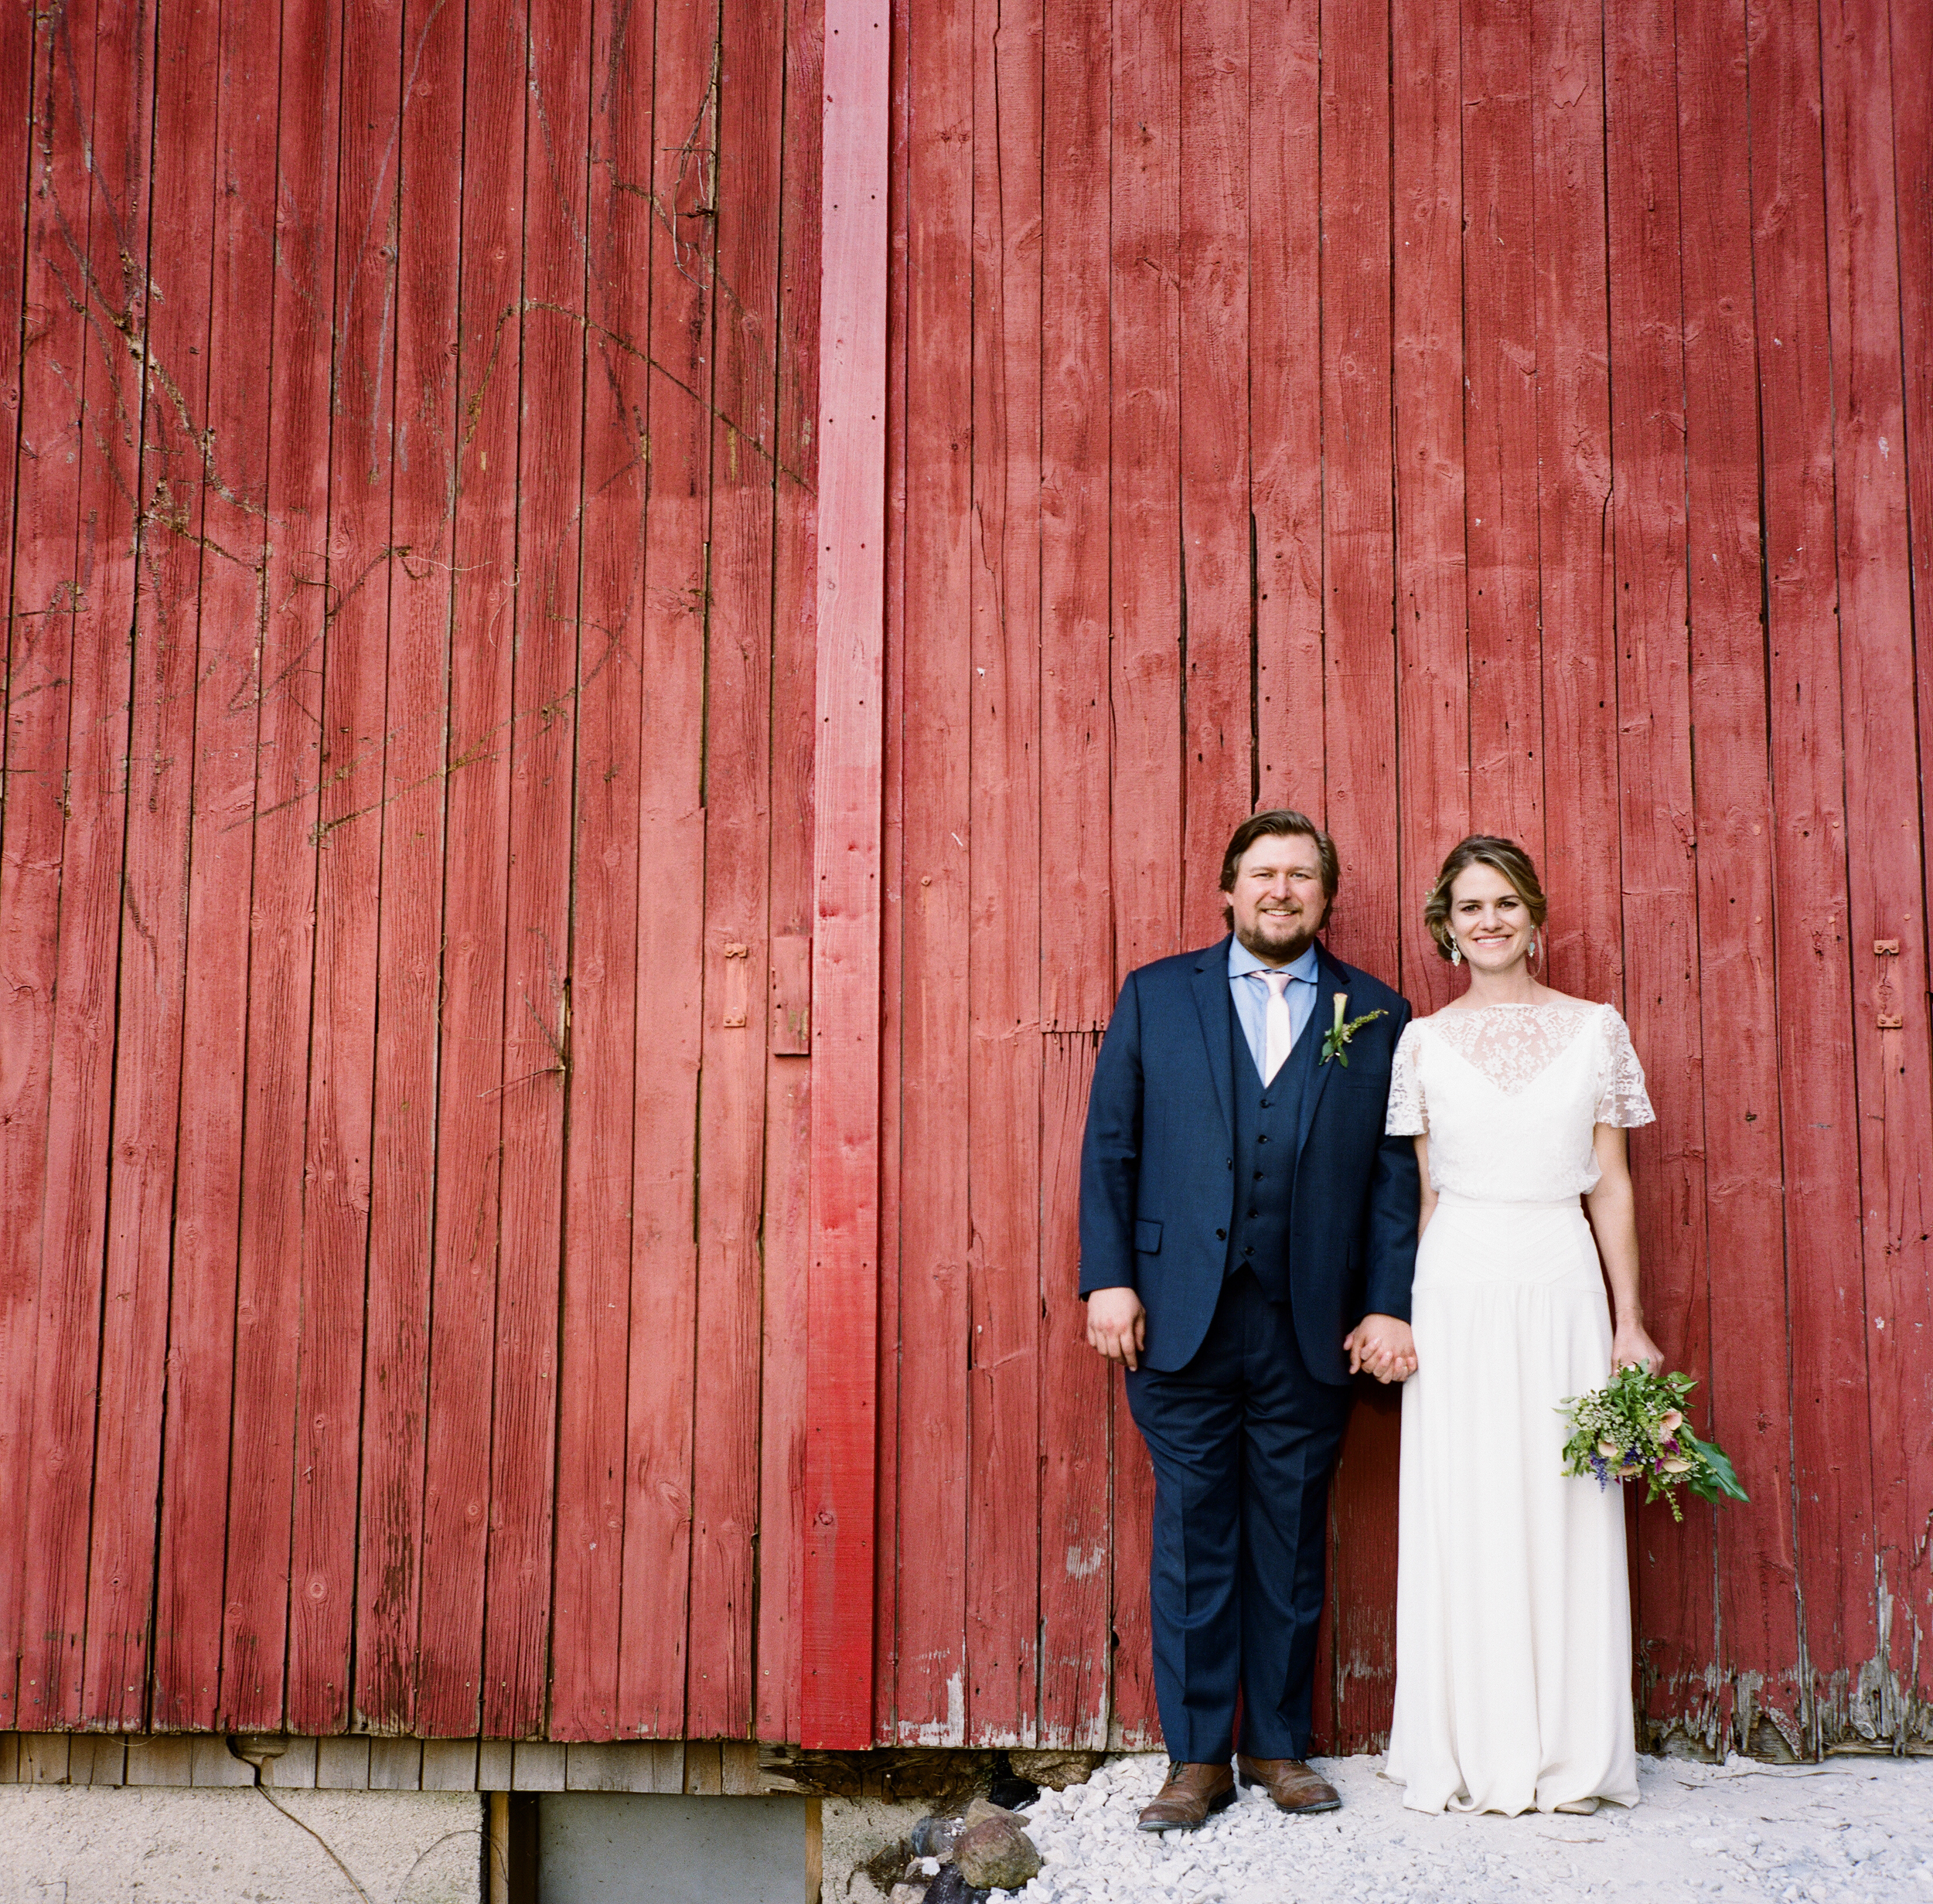   Ryder Farm's historic structures offer a dynamic variety of backdrops for event photography.  